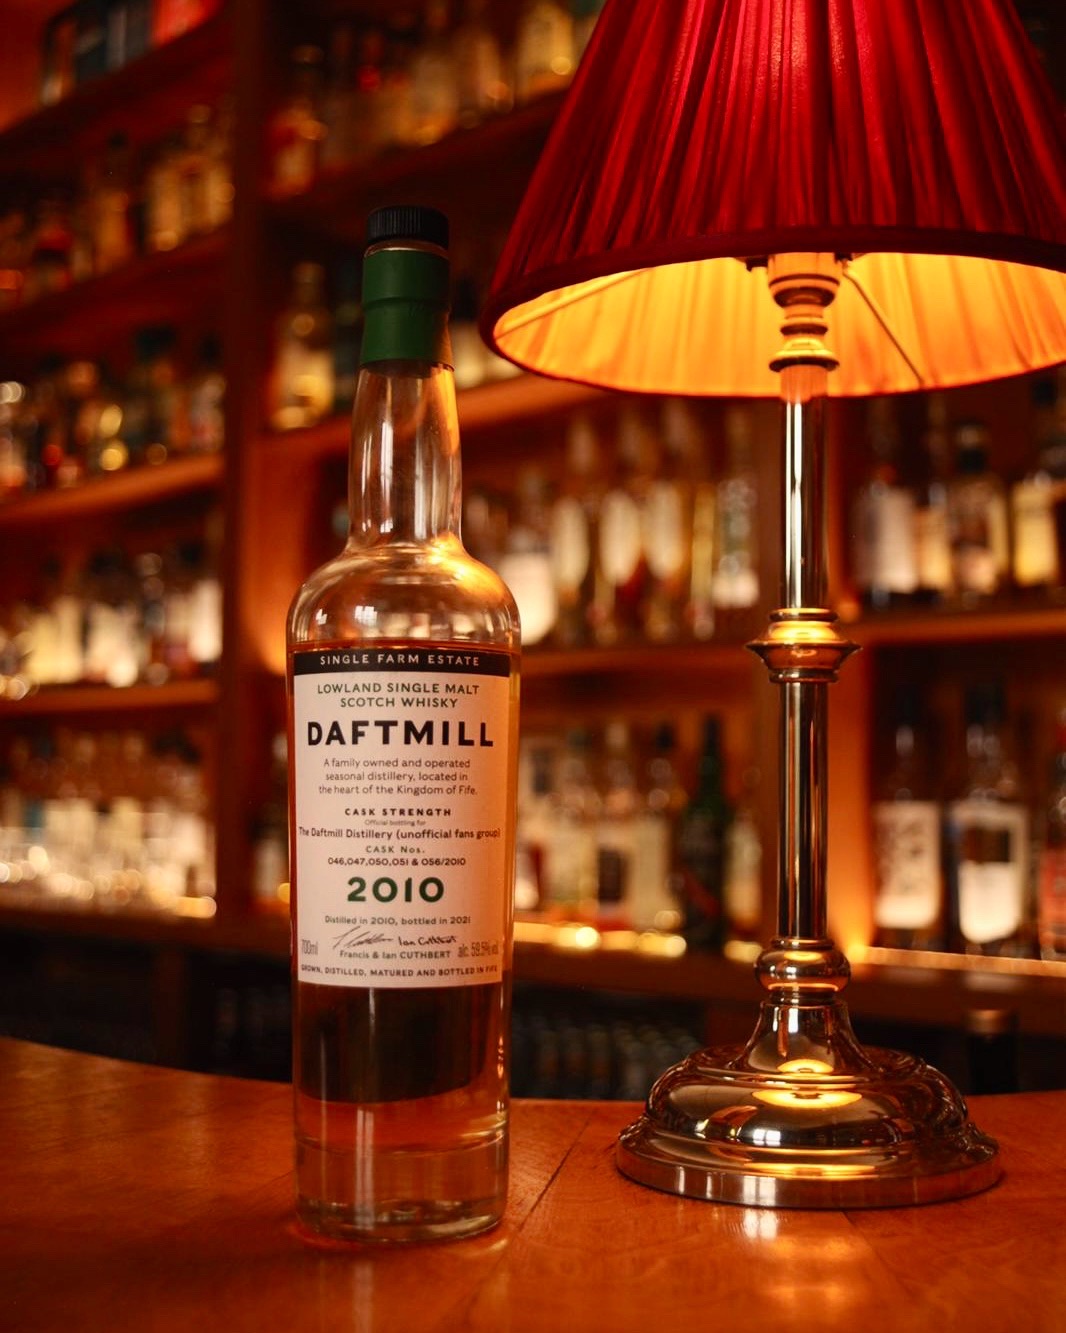 Daftmill is a very interesting distillery with much love in the whisky community, so much so that this is the first bottle behind the bar here at the Quaich. The distillery is a farm-to-bottle operation, meaning that the only produce is from the barley that they sow on their farm in Fife. Mid-Summer and Winter are the two times in the year that they produce whisky because farm work quiets down. Adding all this together, and considering the fact that they only produce 100 casks a year, this week is amber-gold dust! This release comes from 5 ex-bourbon casks, which give a lovely honey note, along with the typical floral note from Daftmill Distillery. - Calum Diack, Quaich Bar Manager